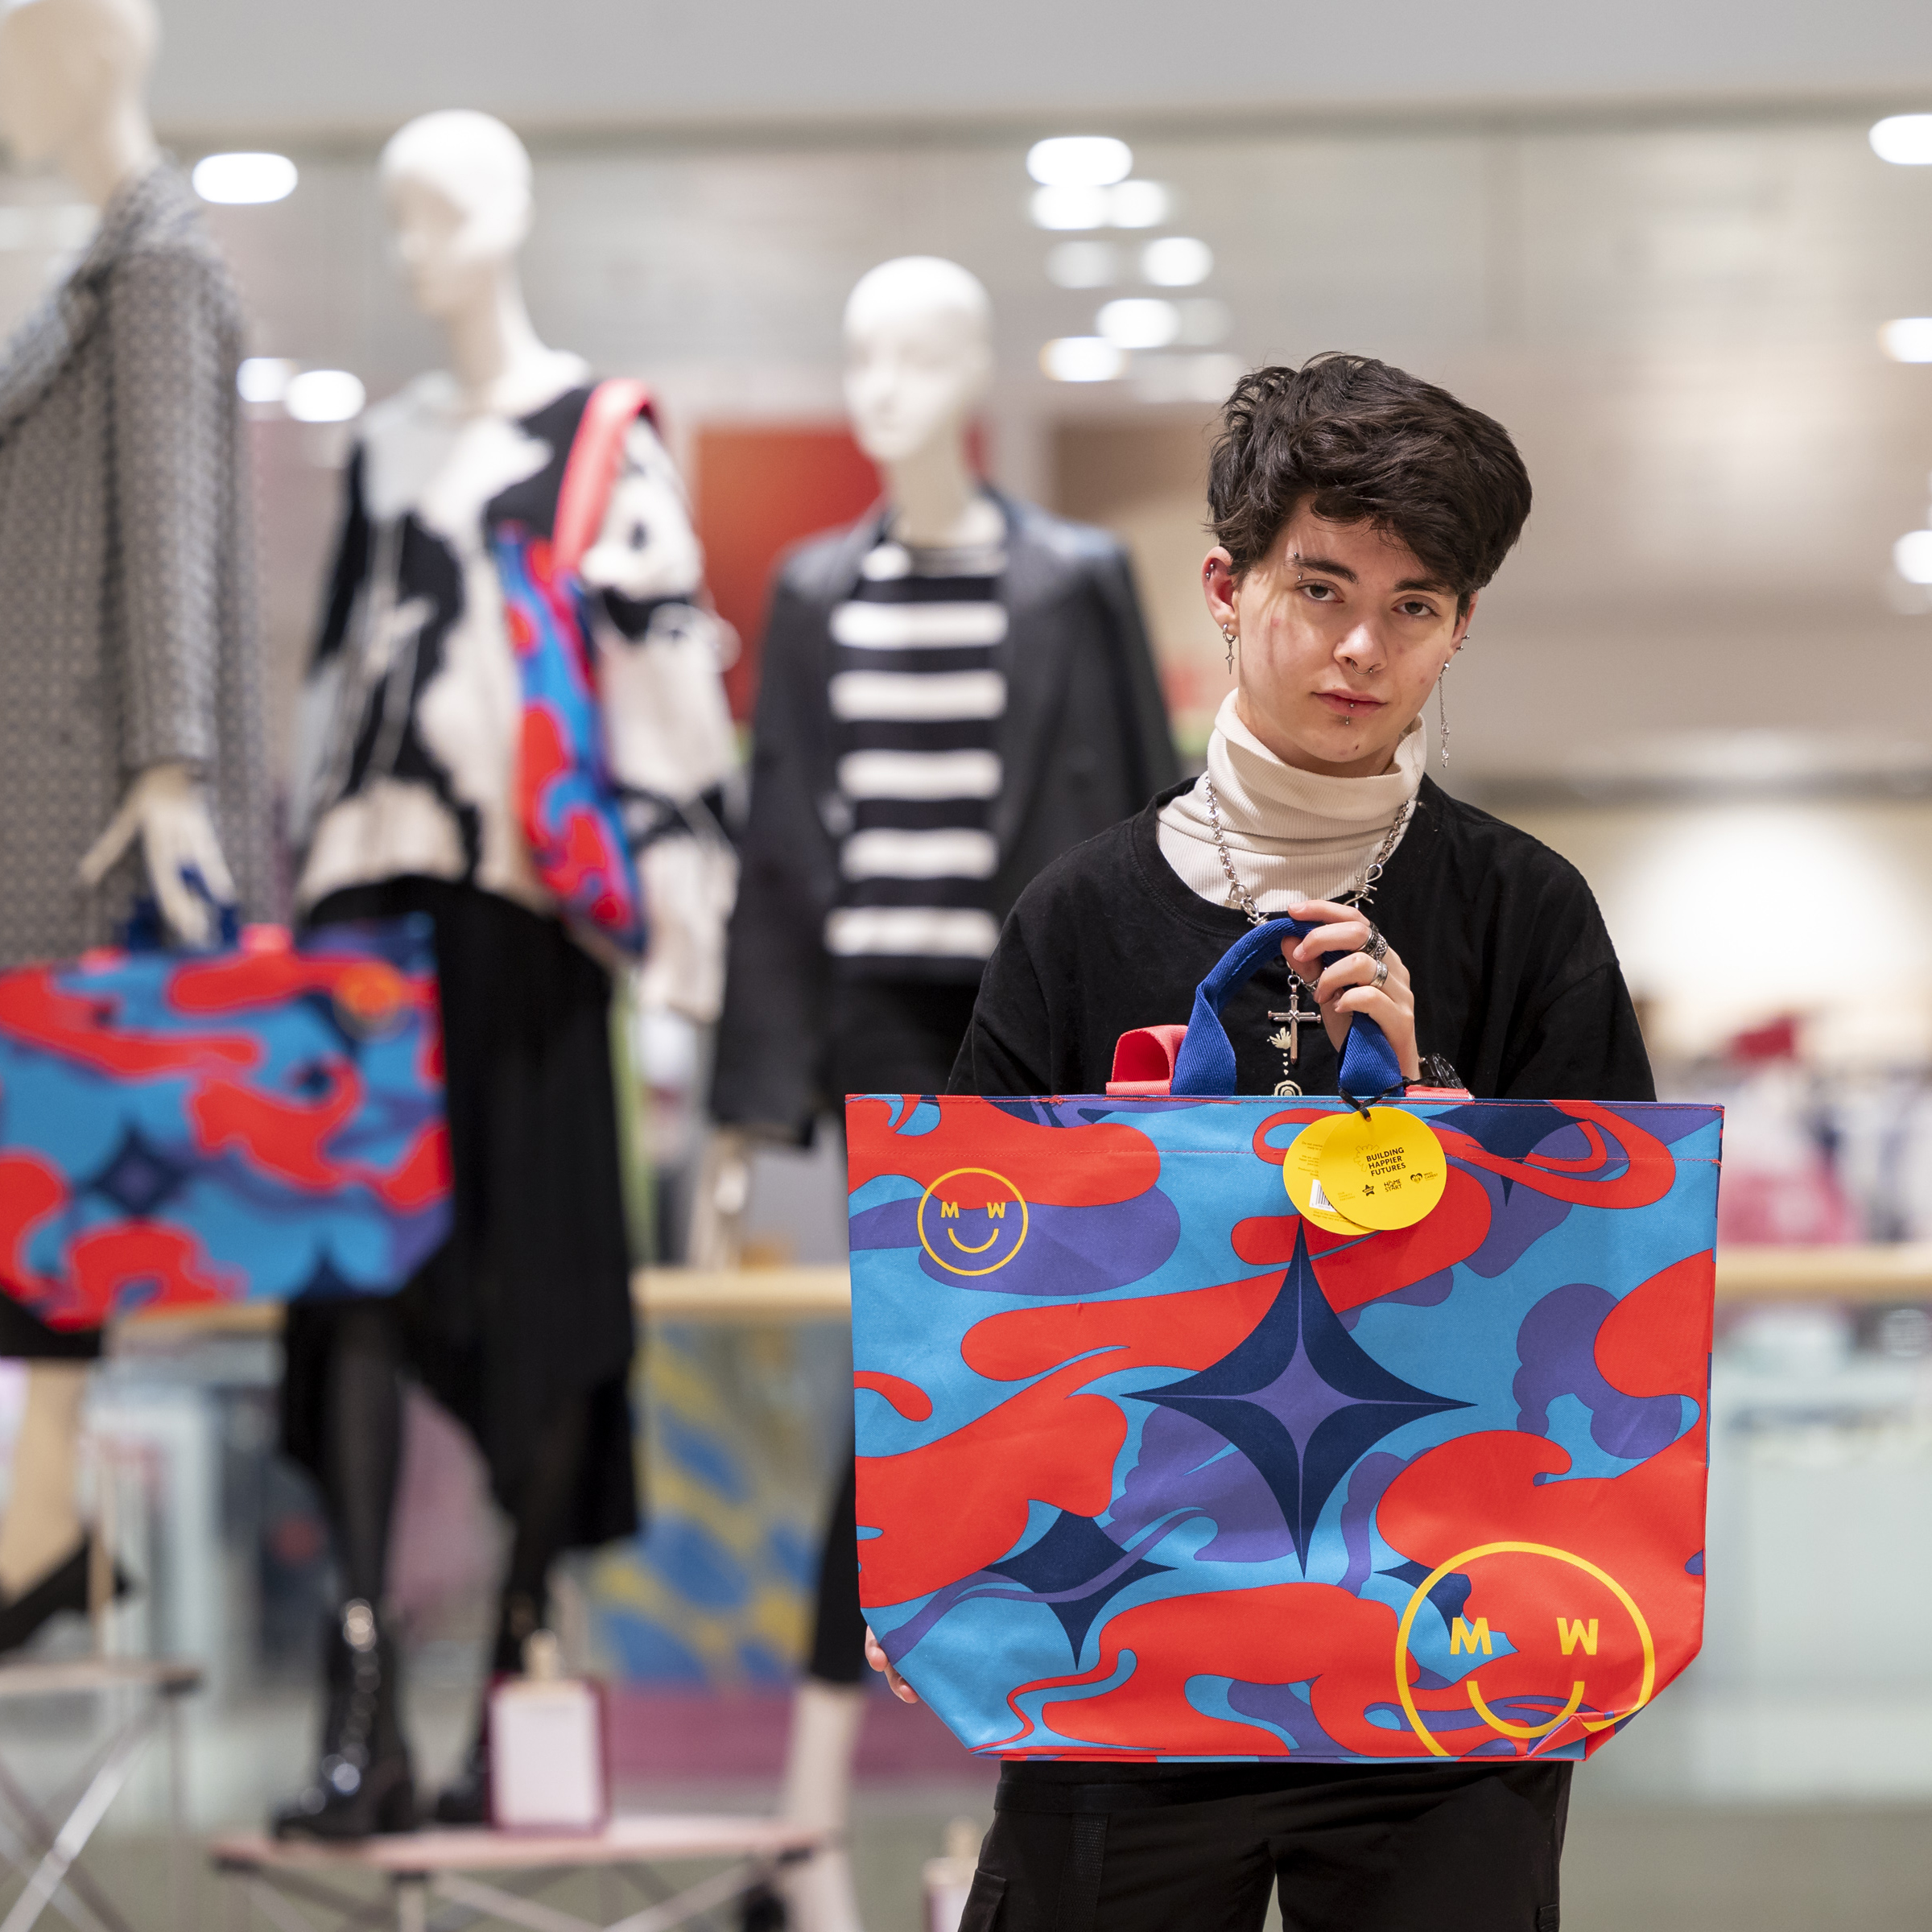 A young person with dark hair stands in front of a group of fashion mannequins. Wearing a black jumper, they hold a brightly coloured tote bag, which features swirls of blue, purple and red